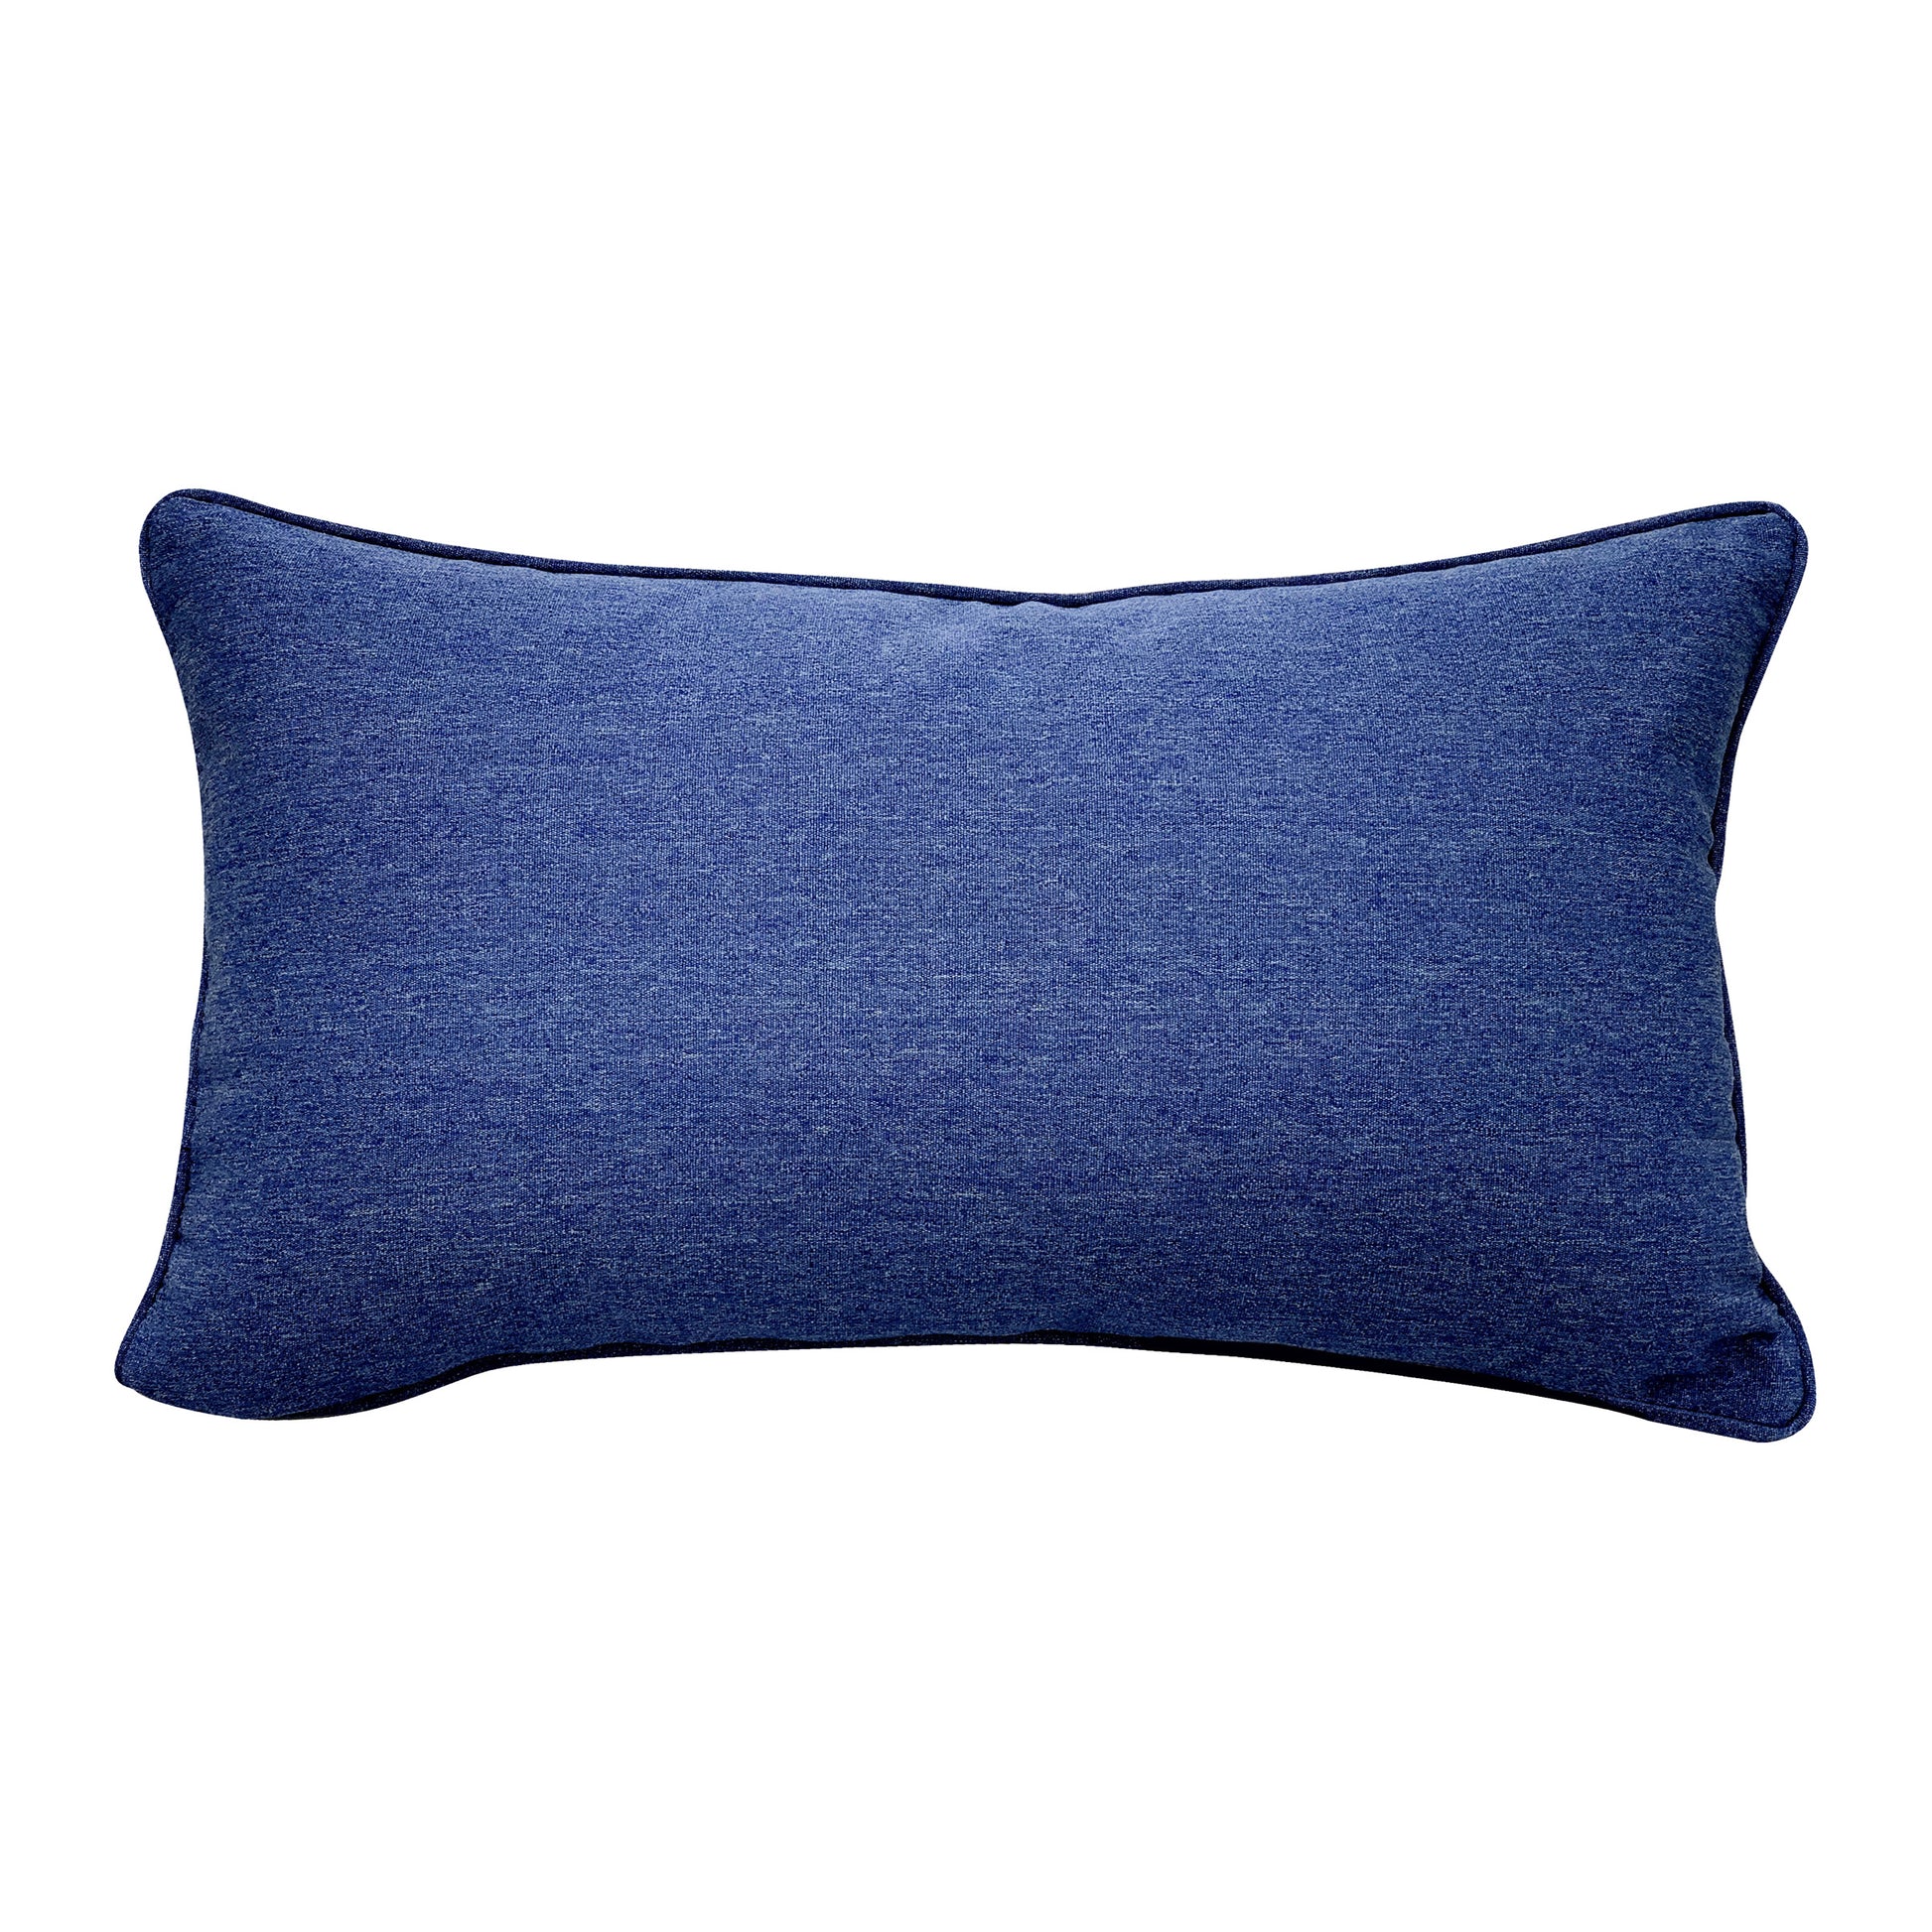 Solid blue fabric; back of the Indigo Seahorse pillow.